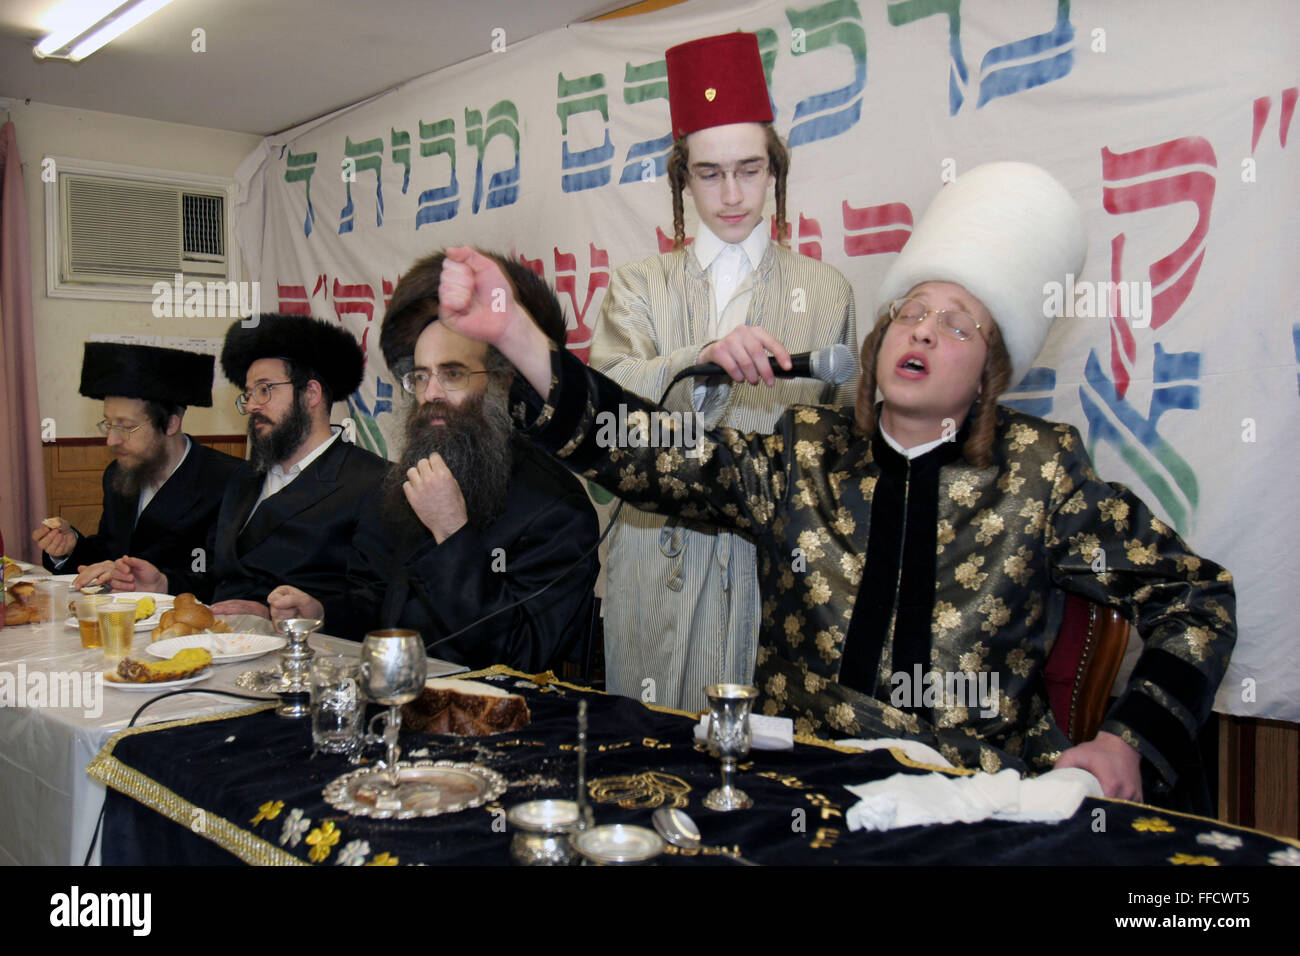 During the Jewish festival of Purim a group of Orthodox Jewish boys from the Viznitz Yeshiva (school) in fancy dress visit local businessmen to collect money for their school. At the end of the day they return to their school and have a celebration feast, the Purim Rabbi performs a song to his class during the meal. Large amounts of alcohol are consumed during the festival. Stock Photo